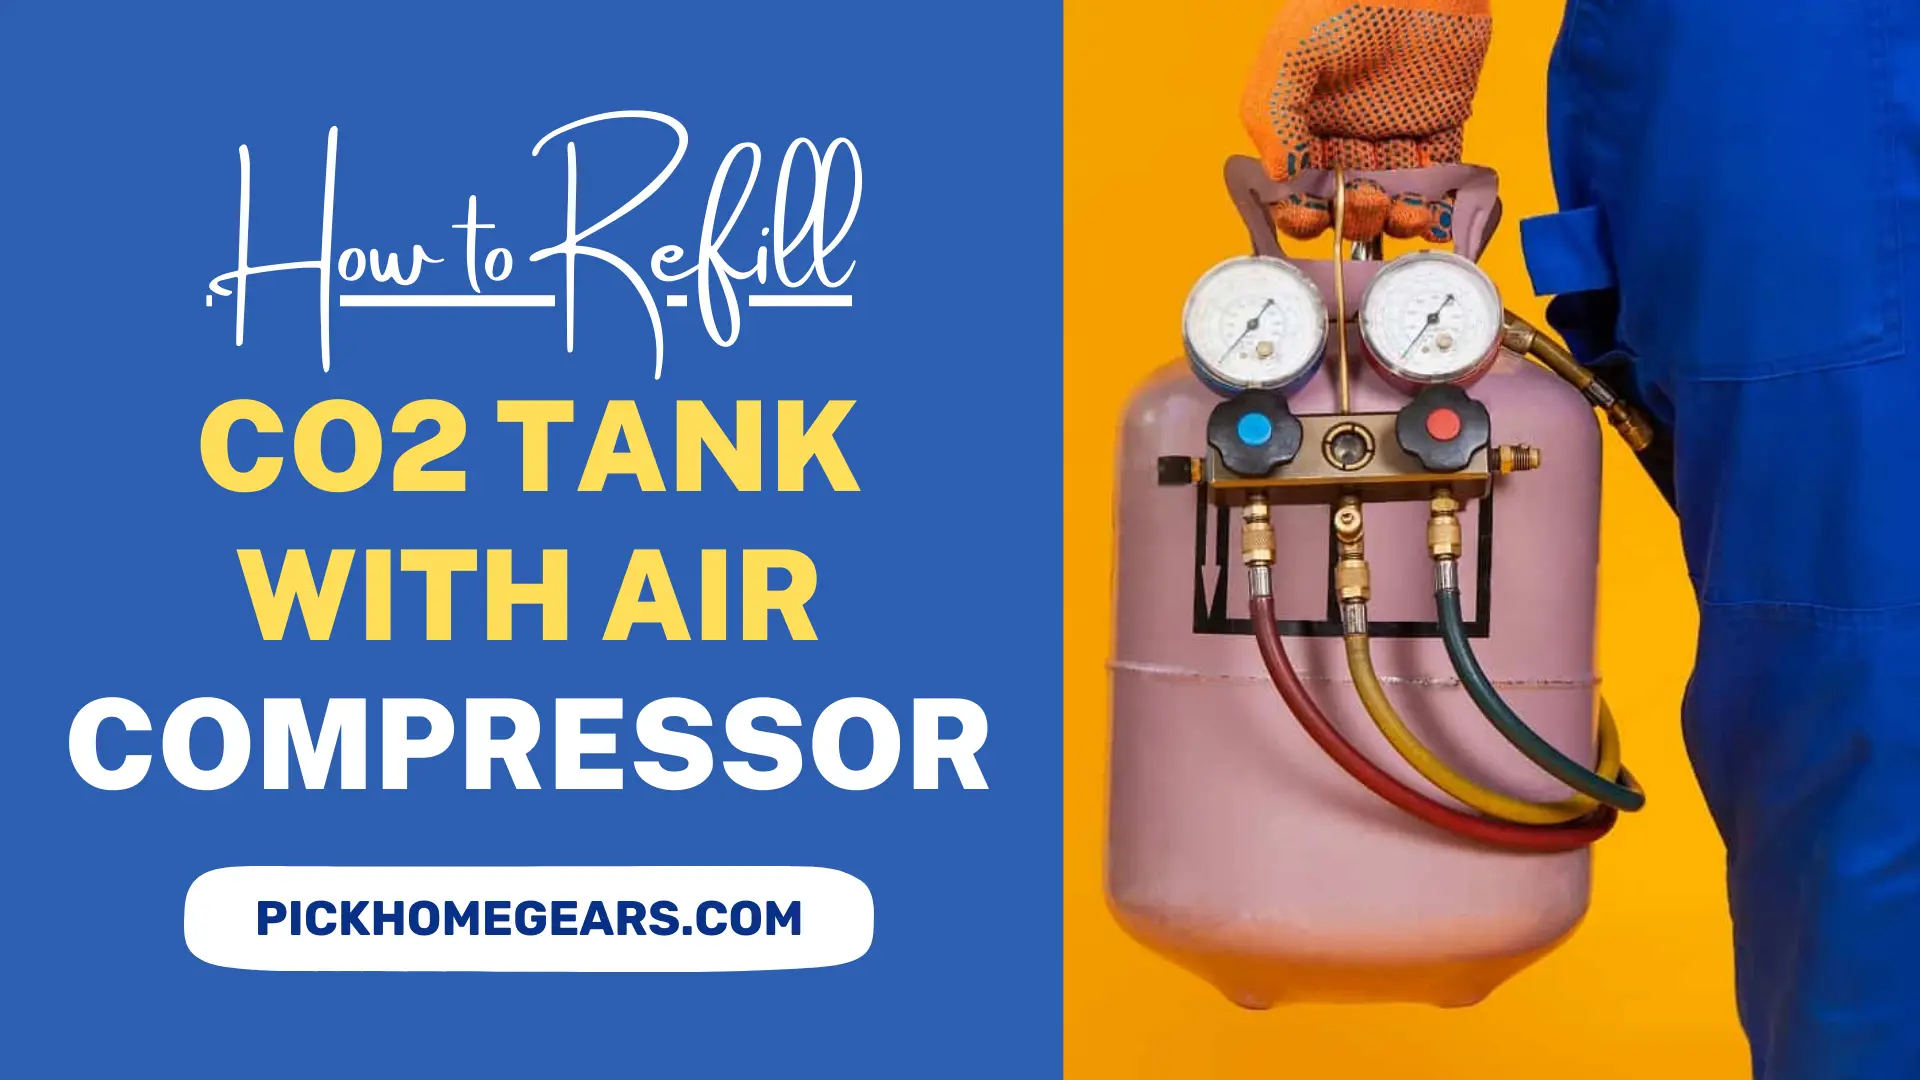 How to Refill CO2 Tank with Air Compressor